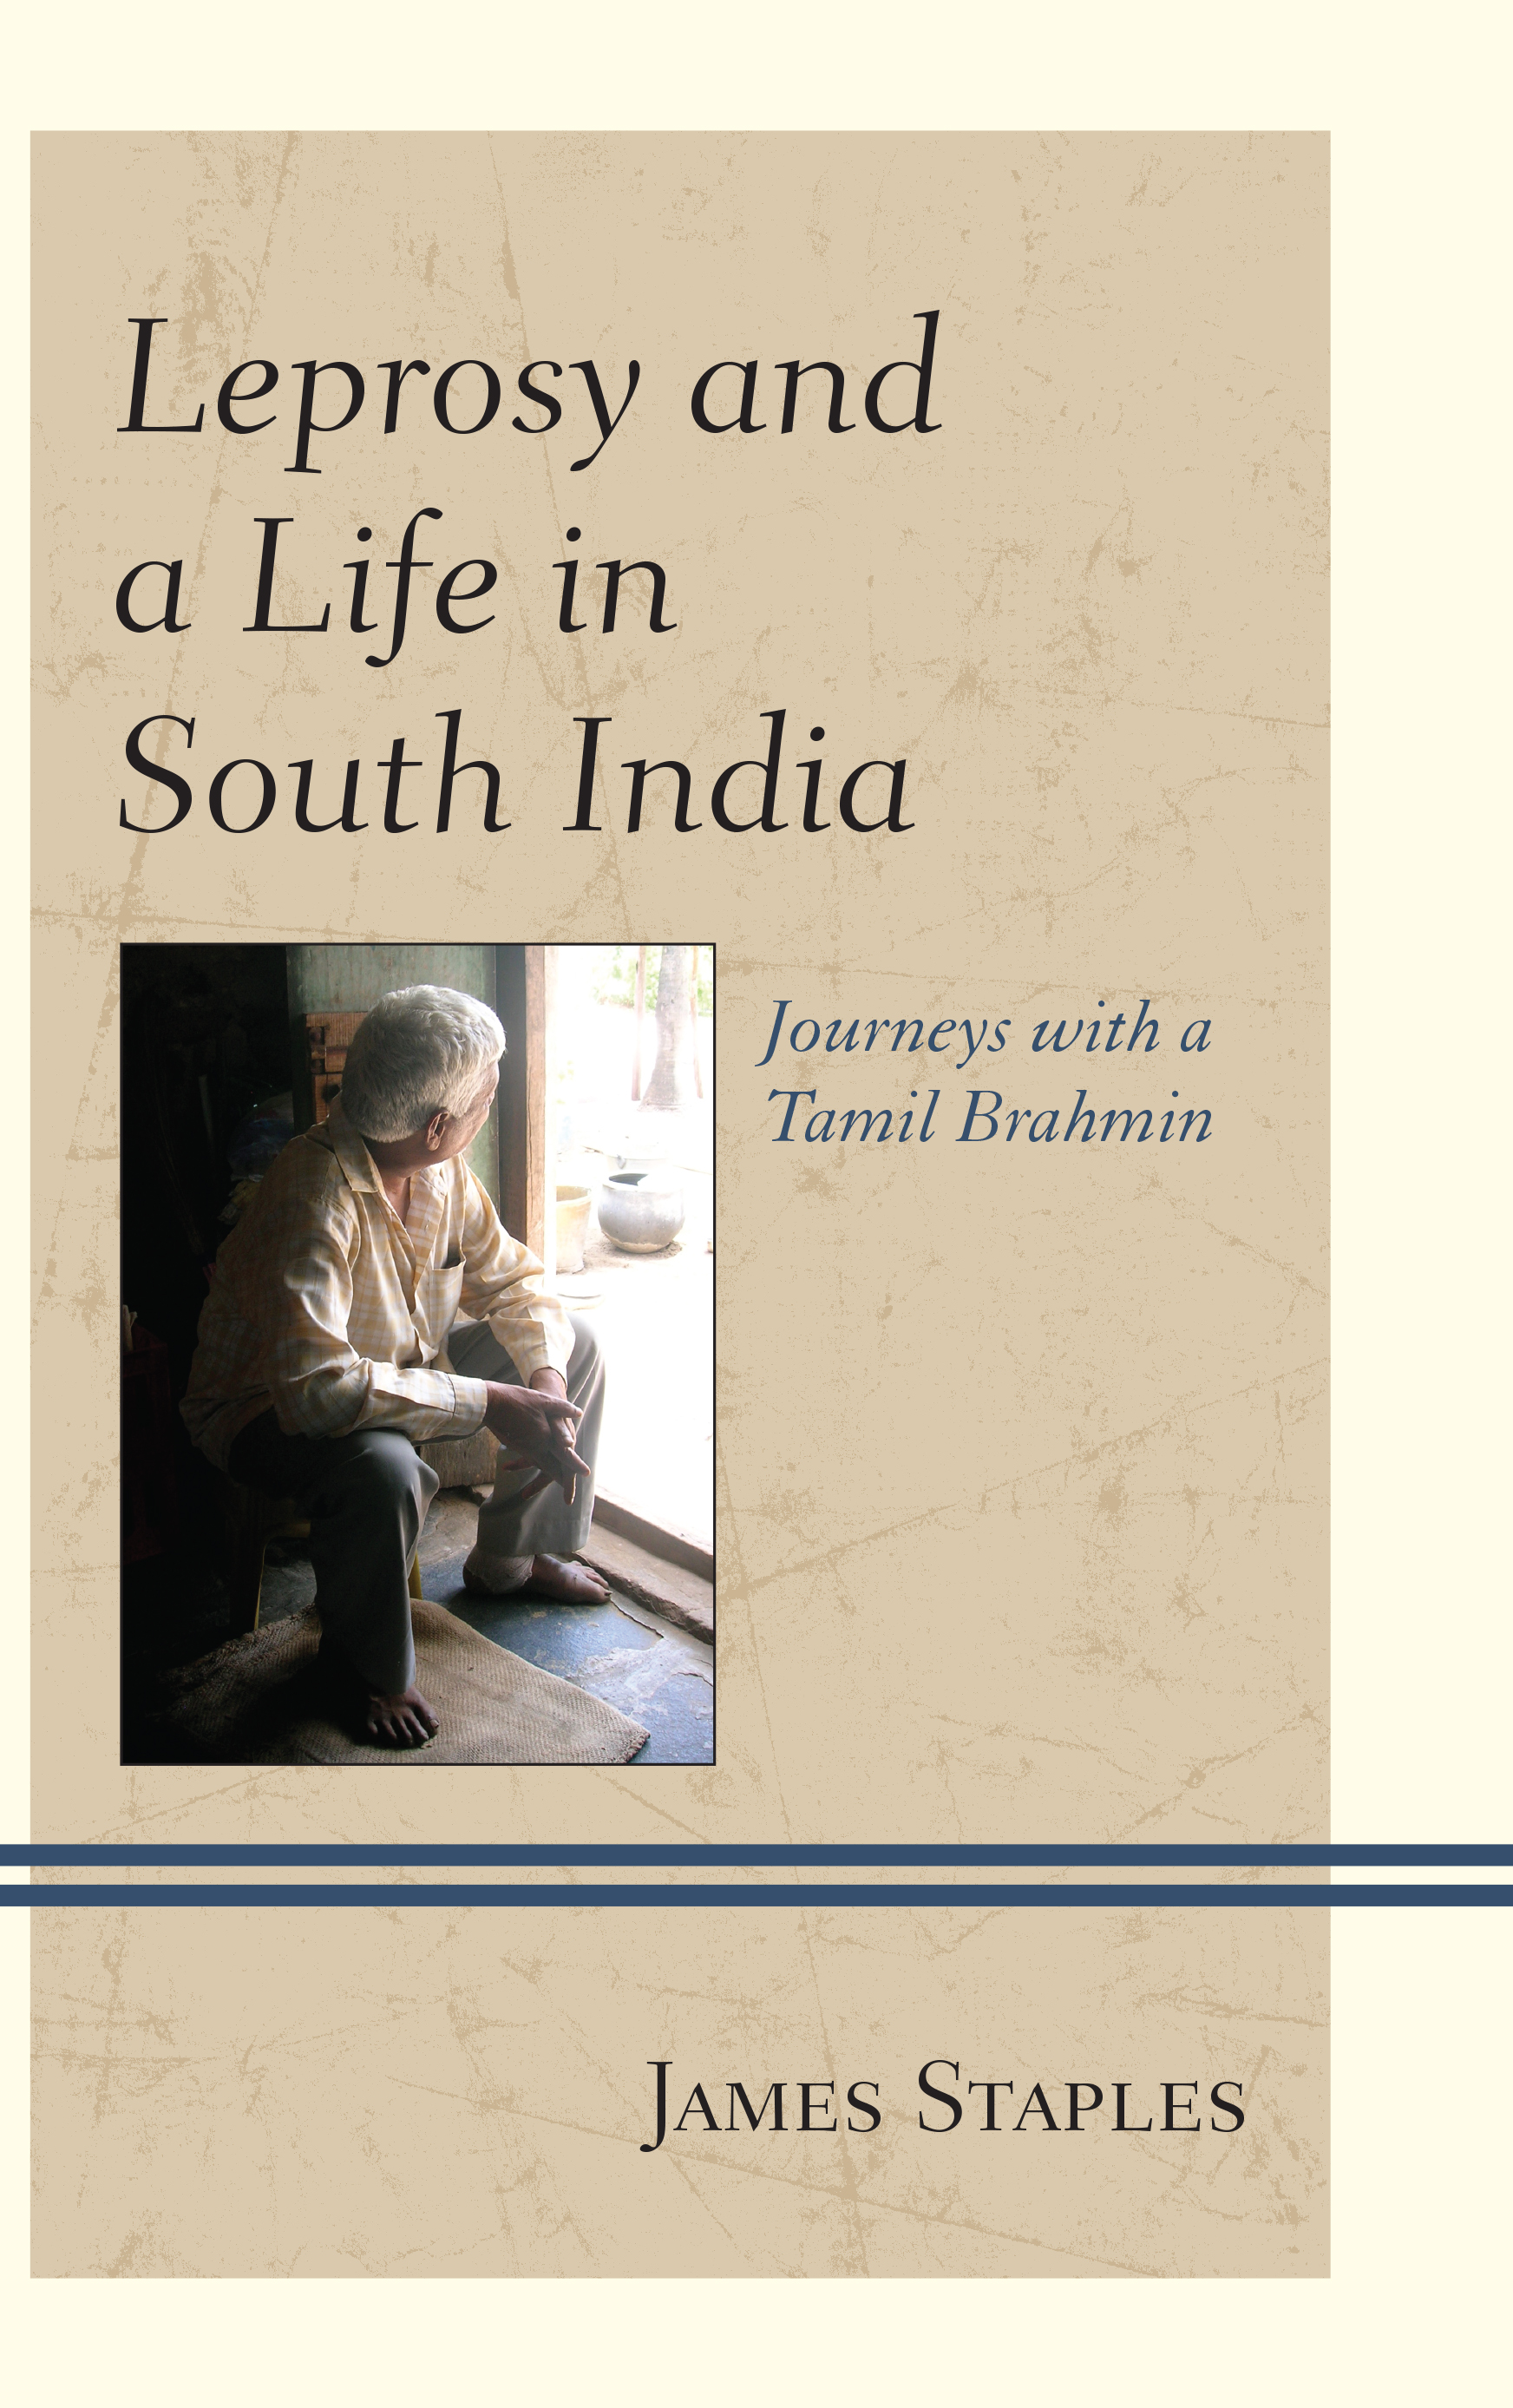 Leprosy and a Life in South India: Journeys with a Tamil Brahmin